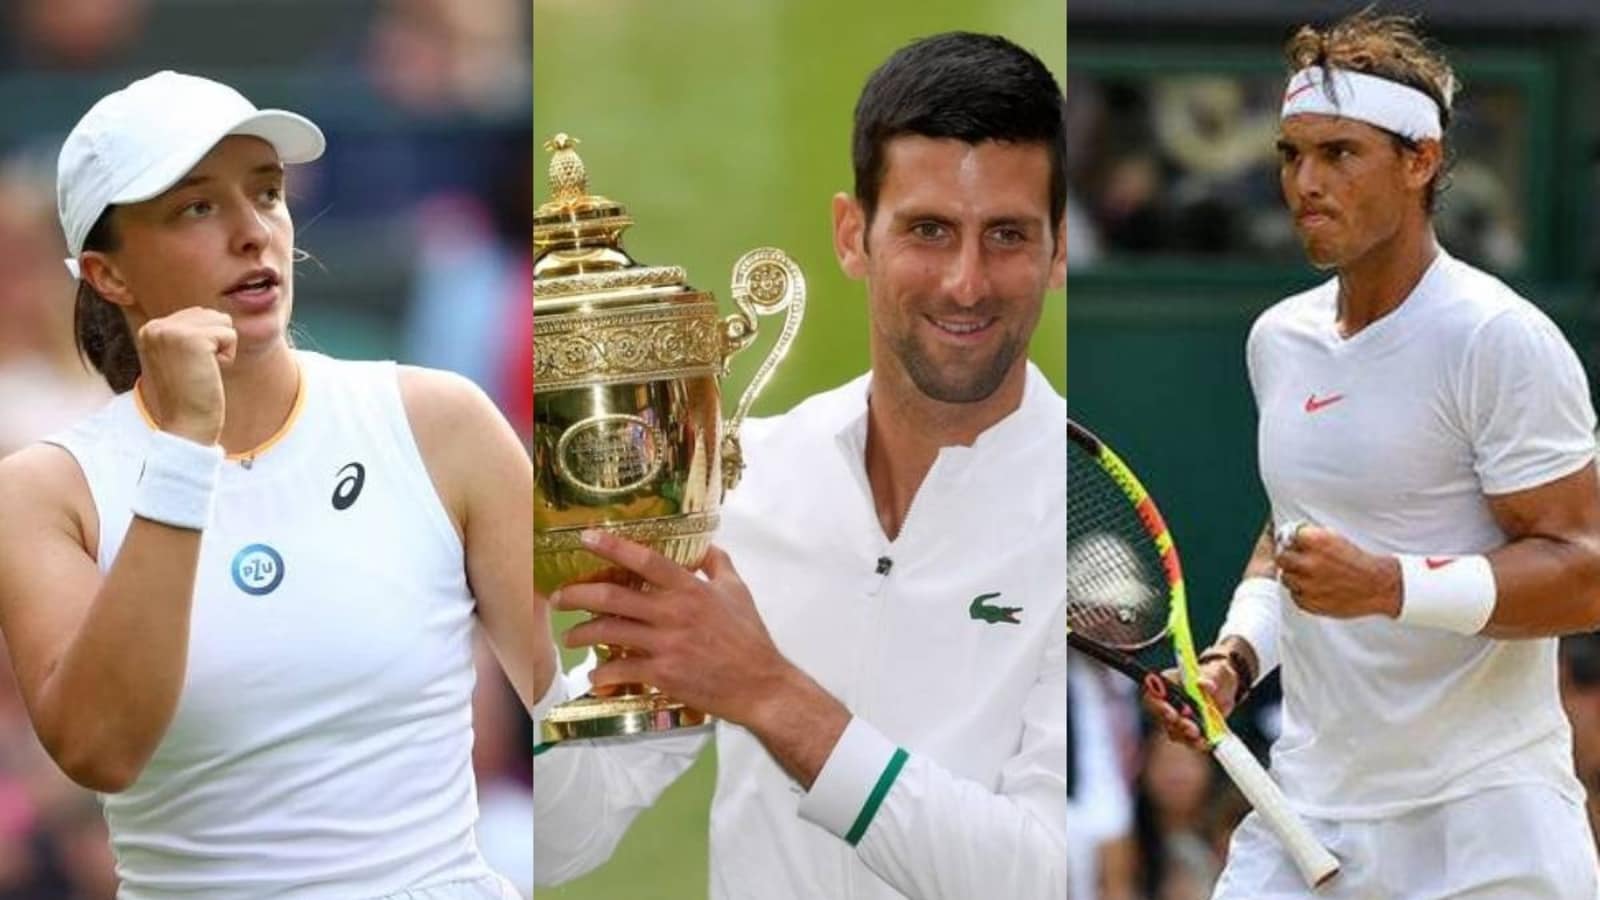 Wimbledon 2022 draws Live Streaming: When and where to watch men’s and women’s singles draws – All you need to know